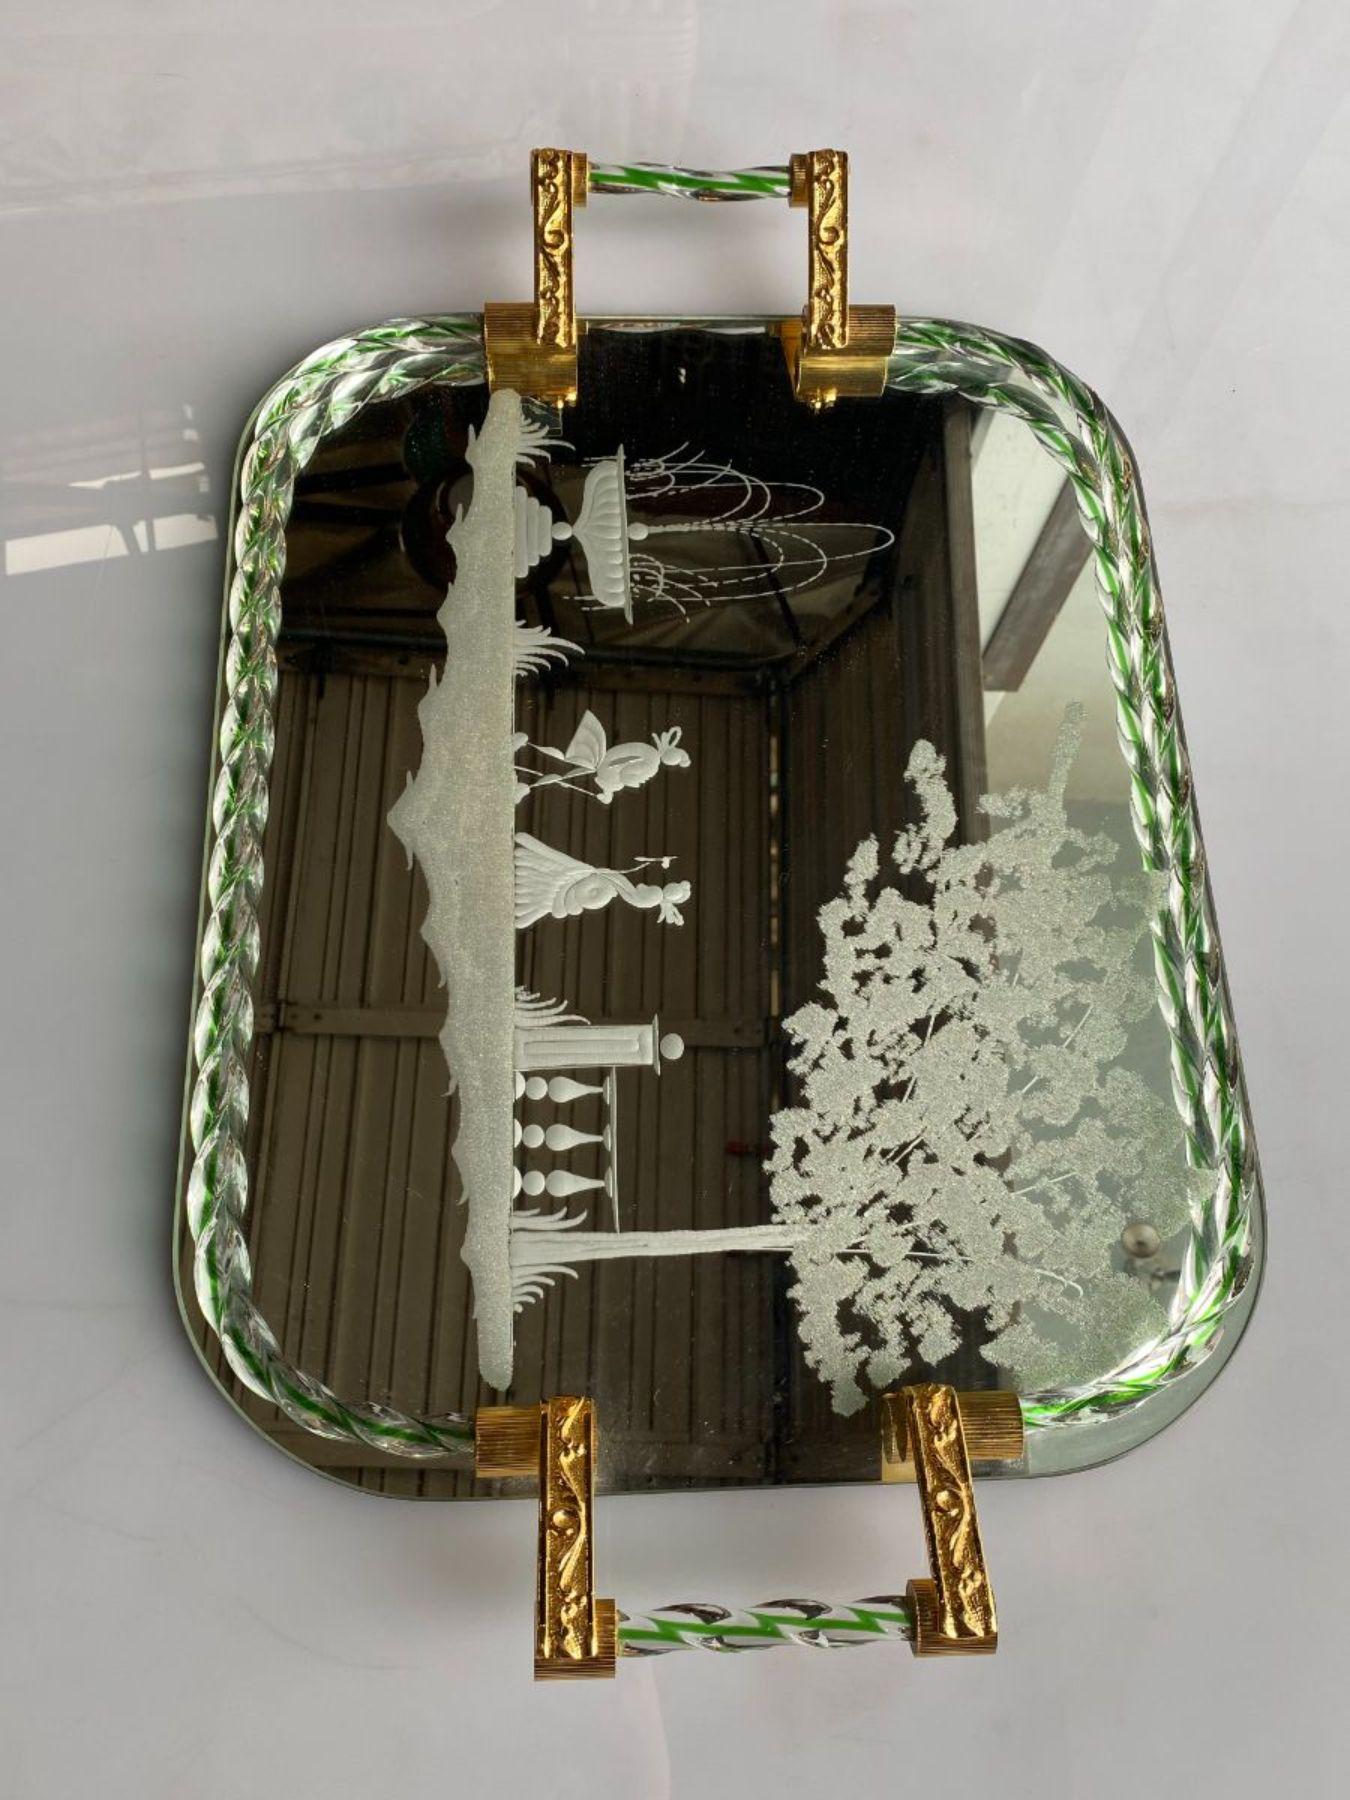 Itailan Murano Barovier Style Vanity Tray with Etched Mirror Twisted Glass Rope In Excellent Condition For Sale In Van Nuys, CA